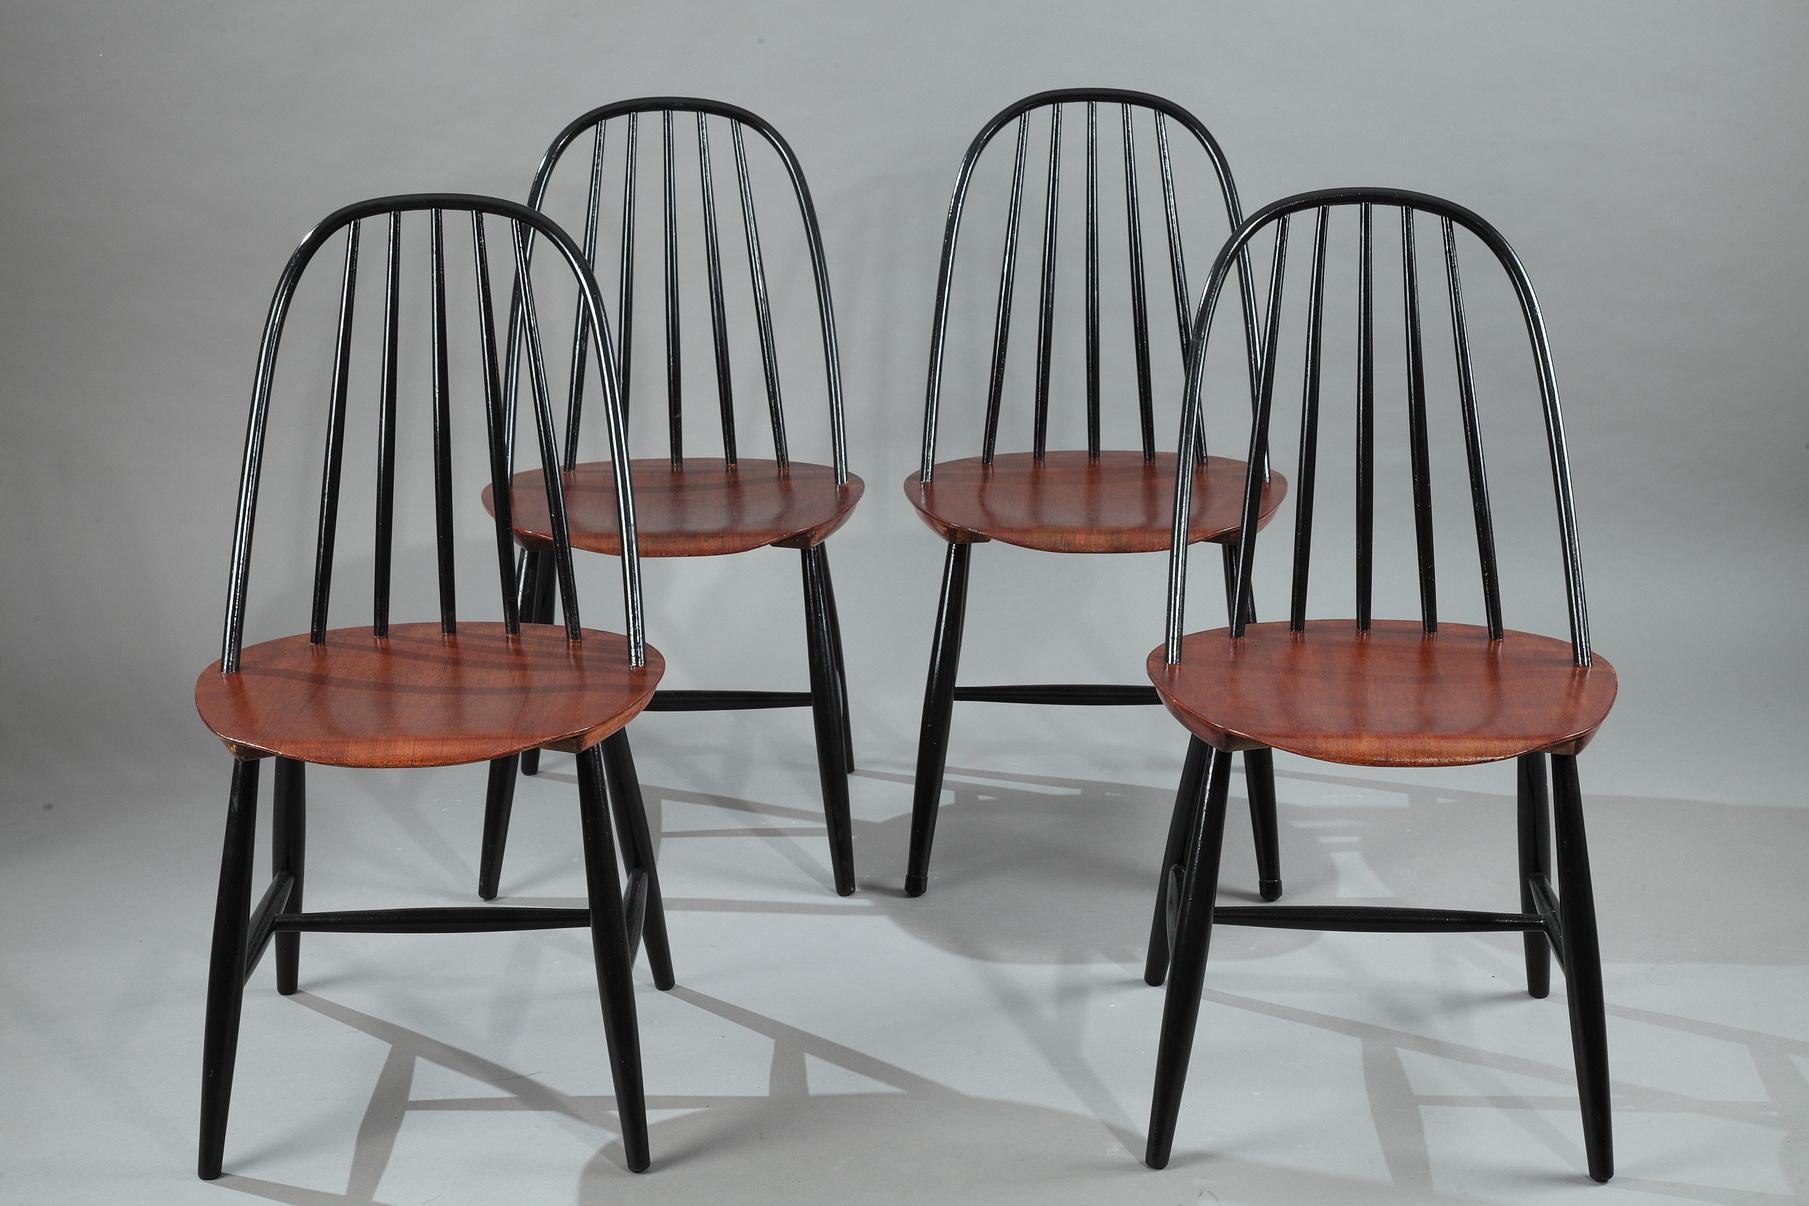 Set of four black lacquered chairs and teak seat, manufactured by Haga Fors, in Sweden,

circa 1950.
Dimension: W 17.7 in - D 16.1in - H 33.5in.
Dimension: L 45 cm, P 41 cm, H 85 cm.